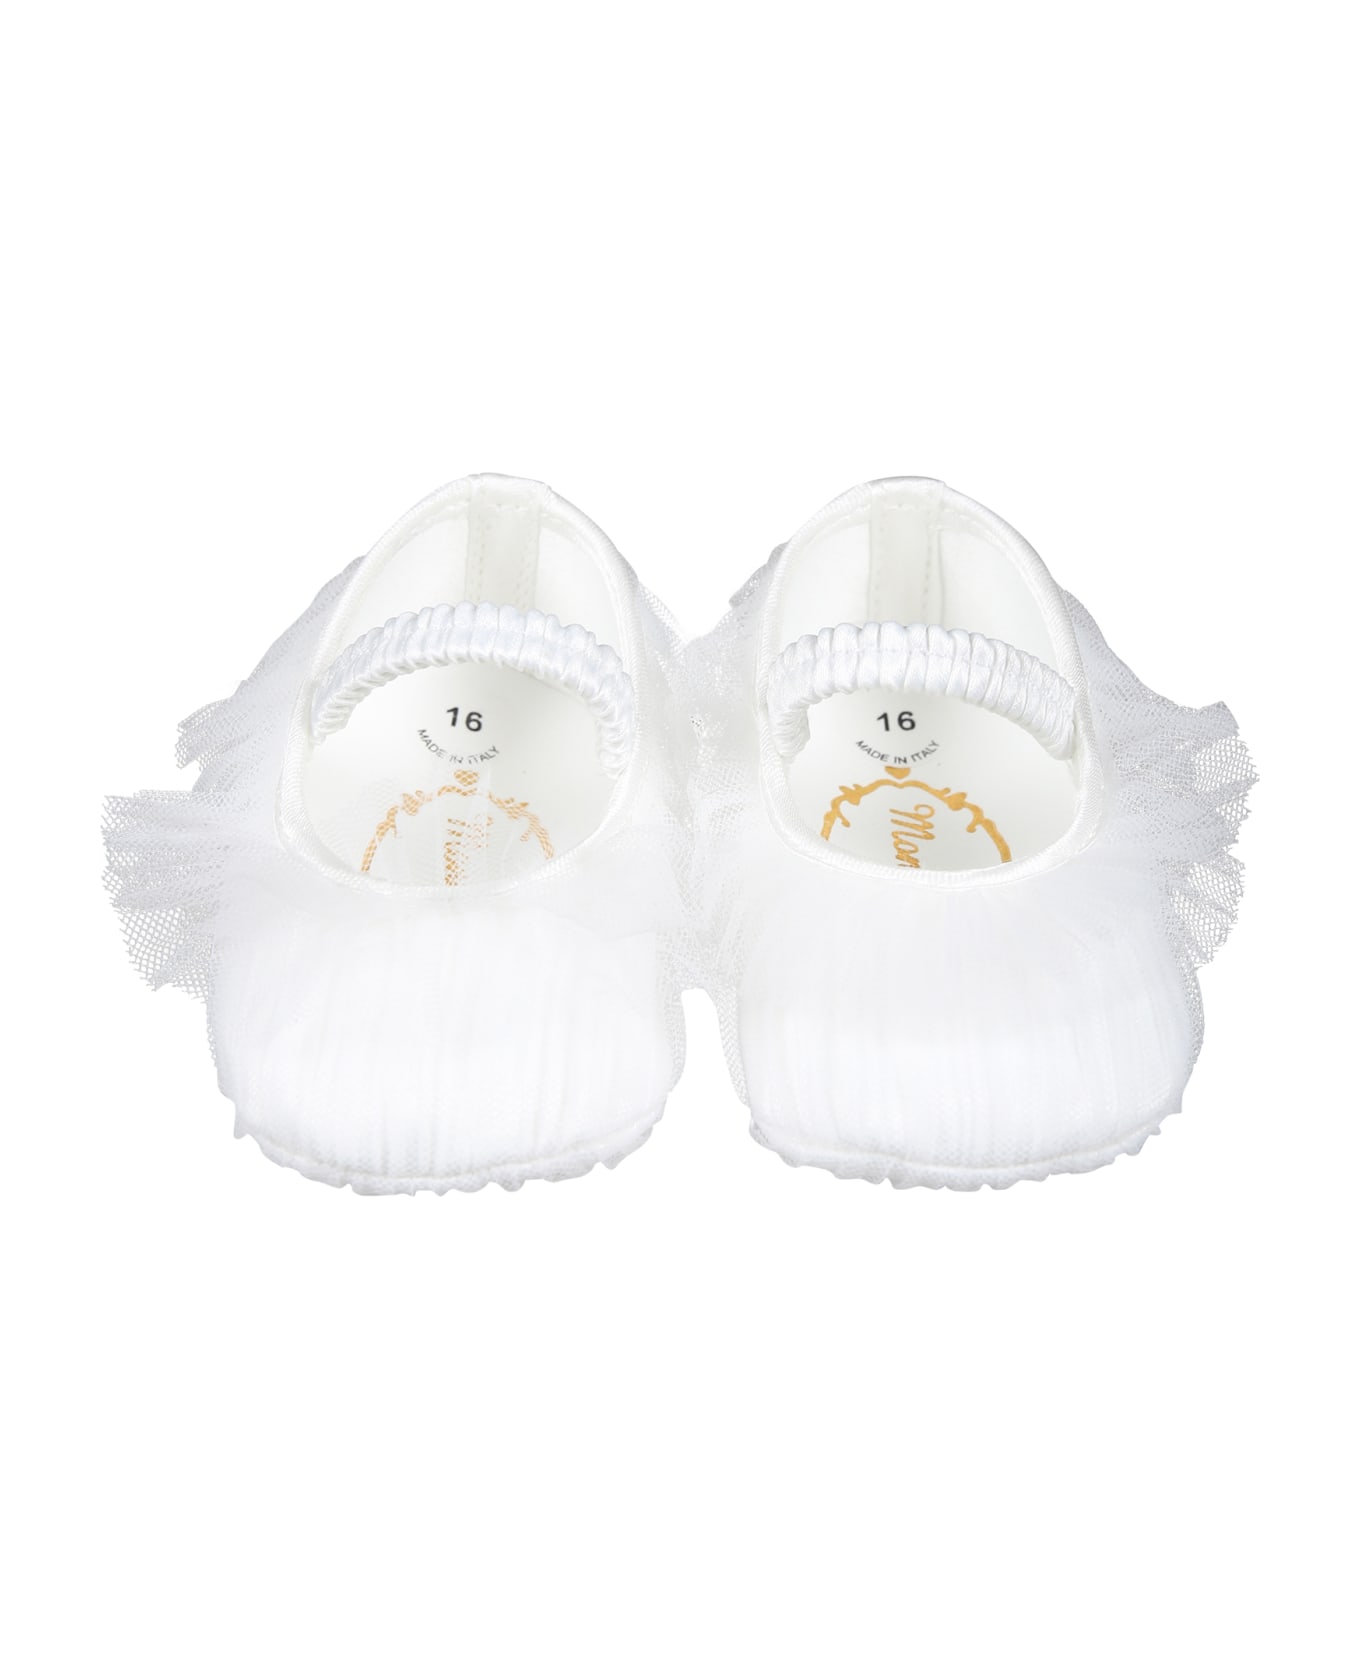 Monnalisa White Flat Shoes For Baby Girl With Tulle Bow - White